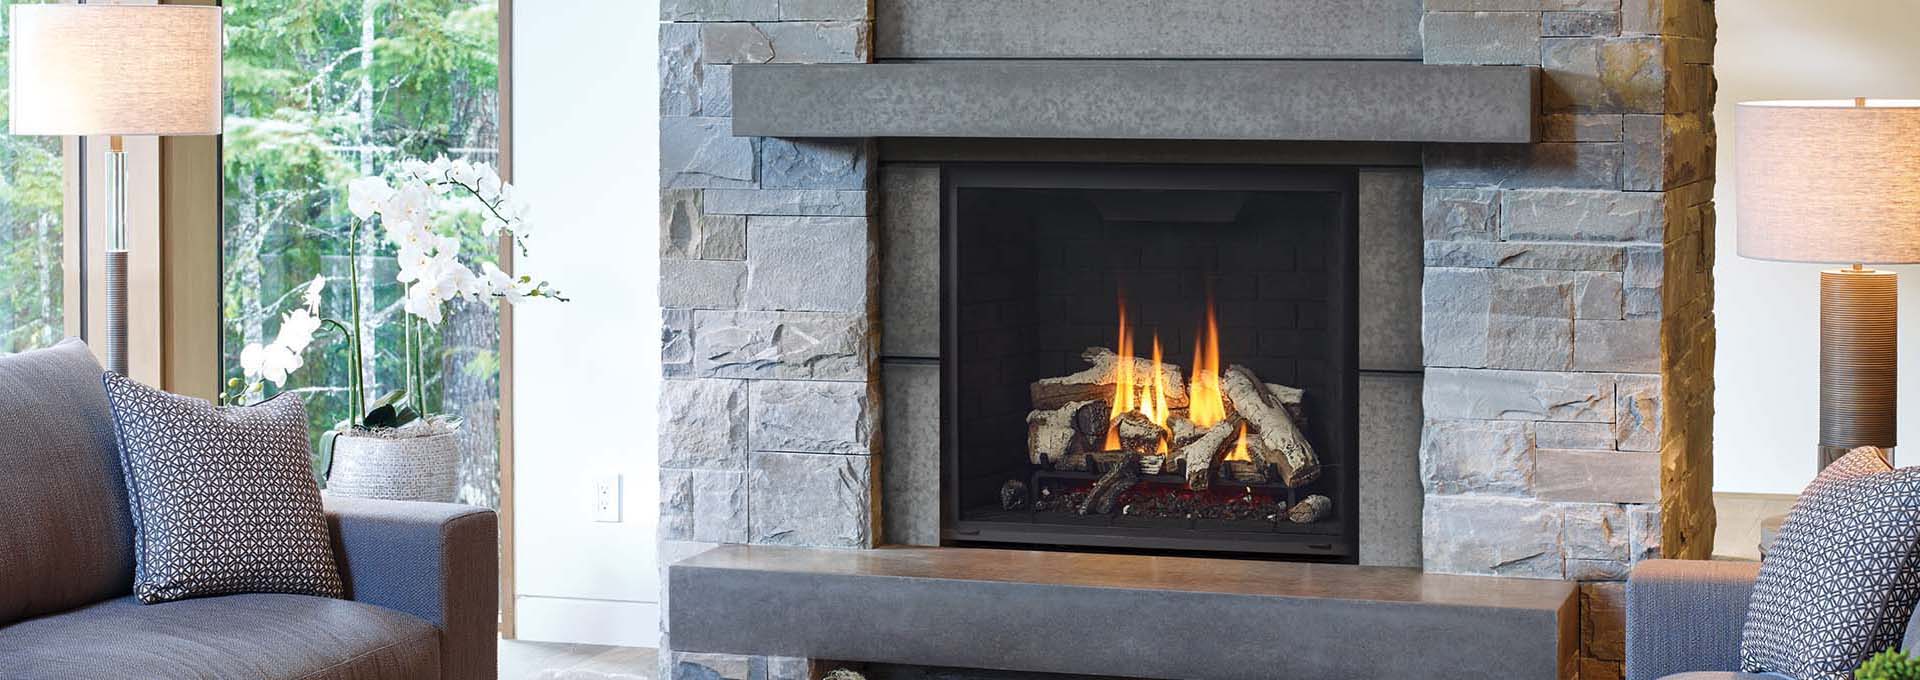 High Quality Fireplaces Inserts, Wood Burning Fireplace Insert Manufacturers